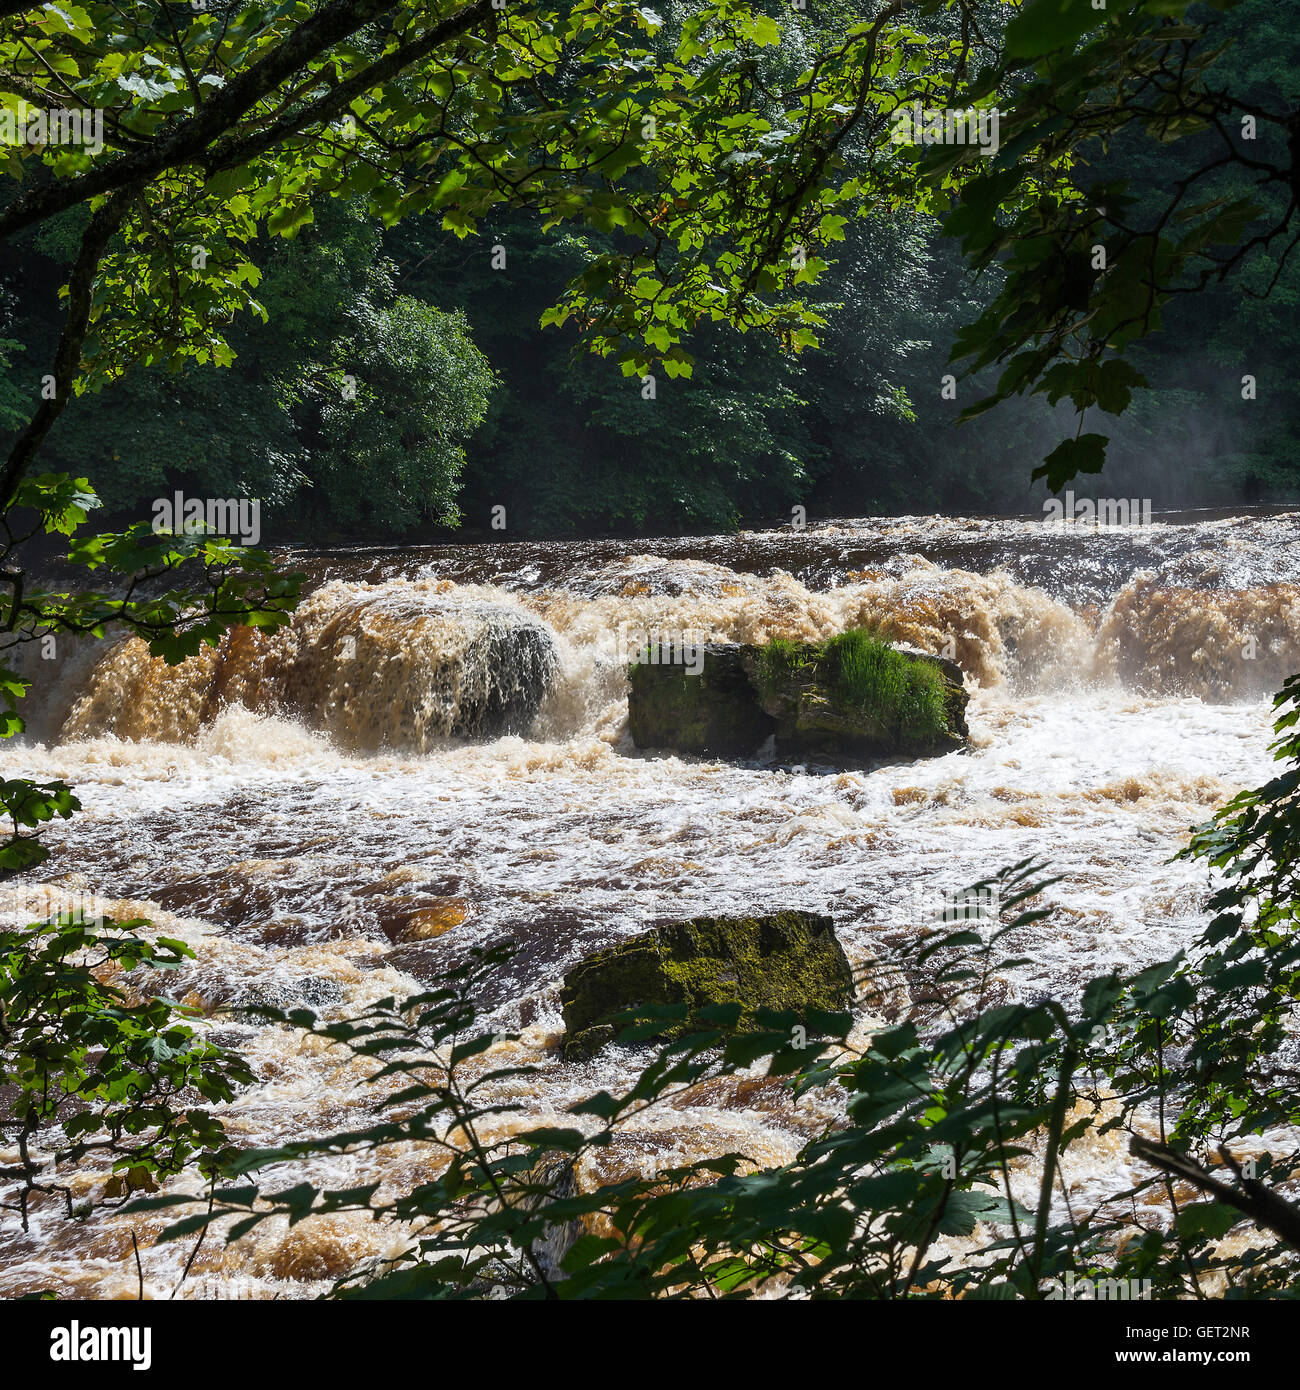 The Beautiful Upper Aysgarth Falls on the River Ure in Wensleydale Yorkshire Dales National Park England United Kingdom UK Stock Photo